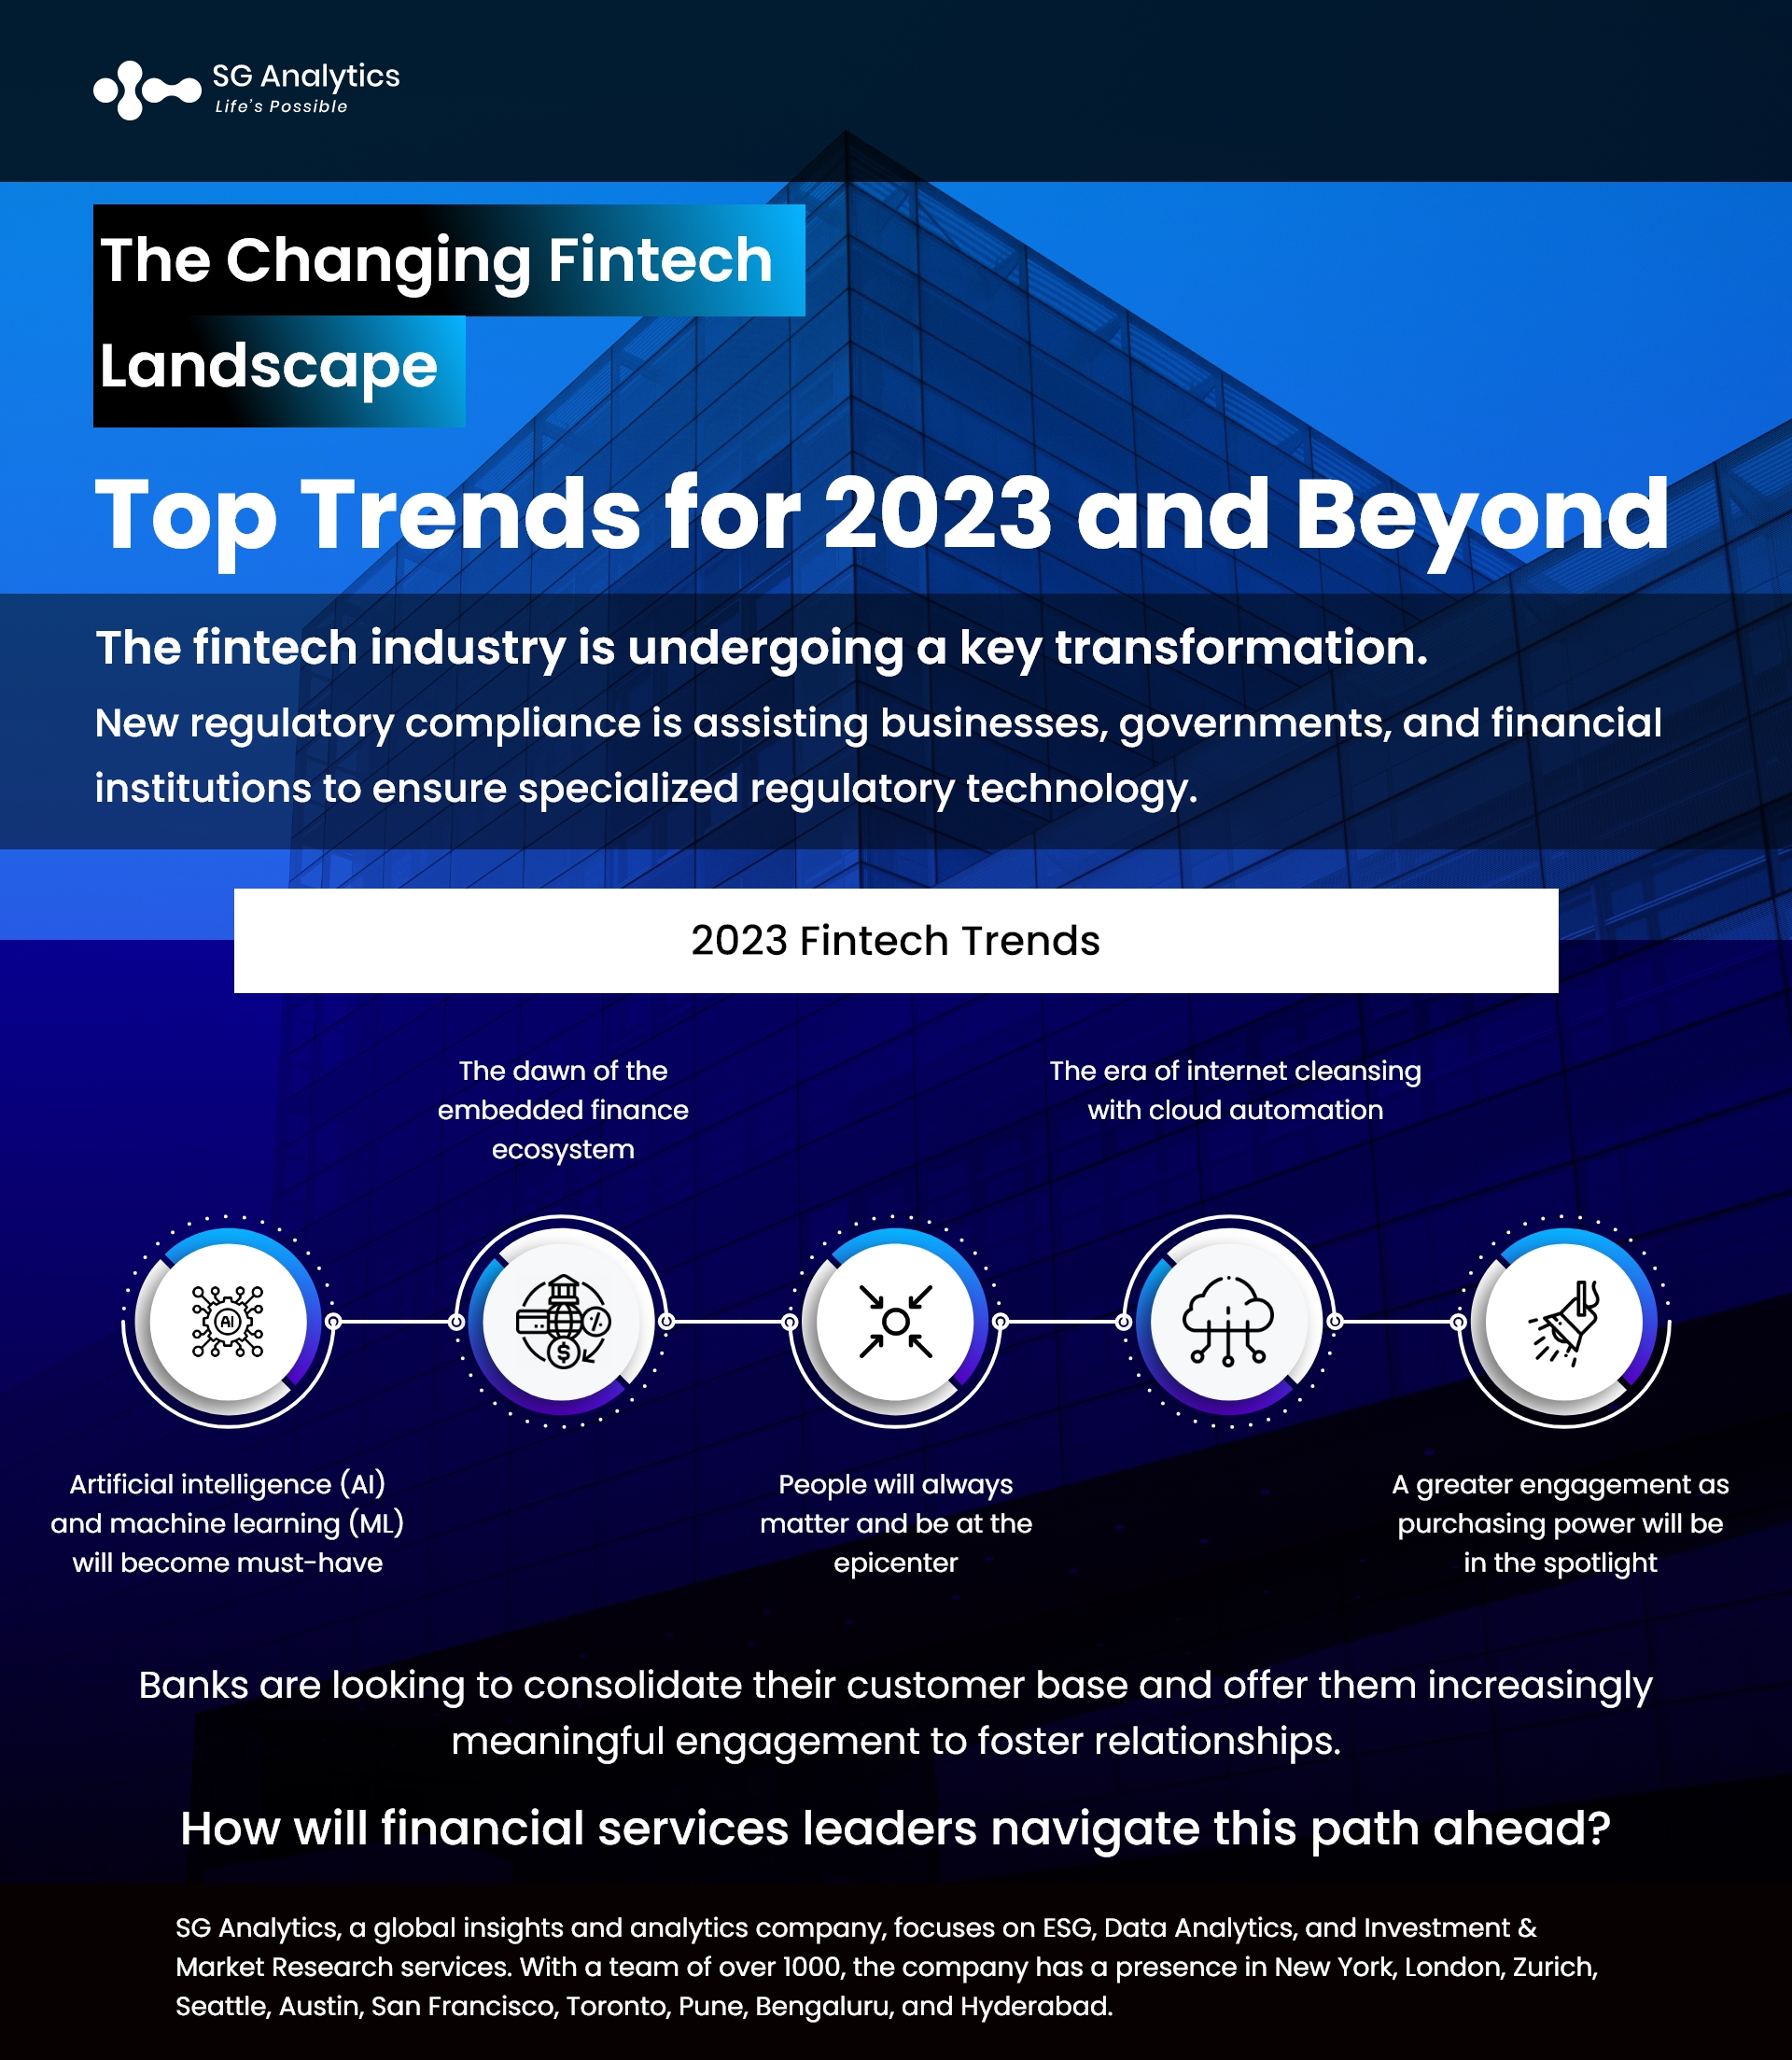 The Changing Fintech Landscape - Top Trends for 2023 and Beyond 